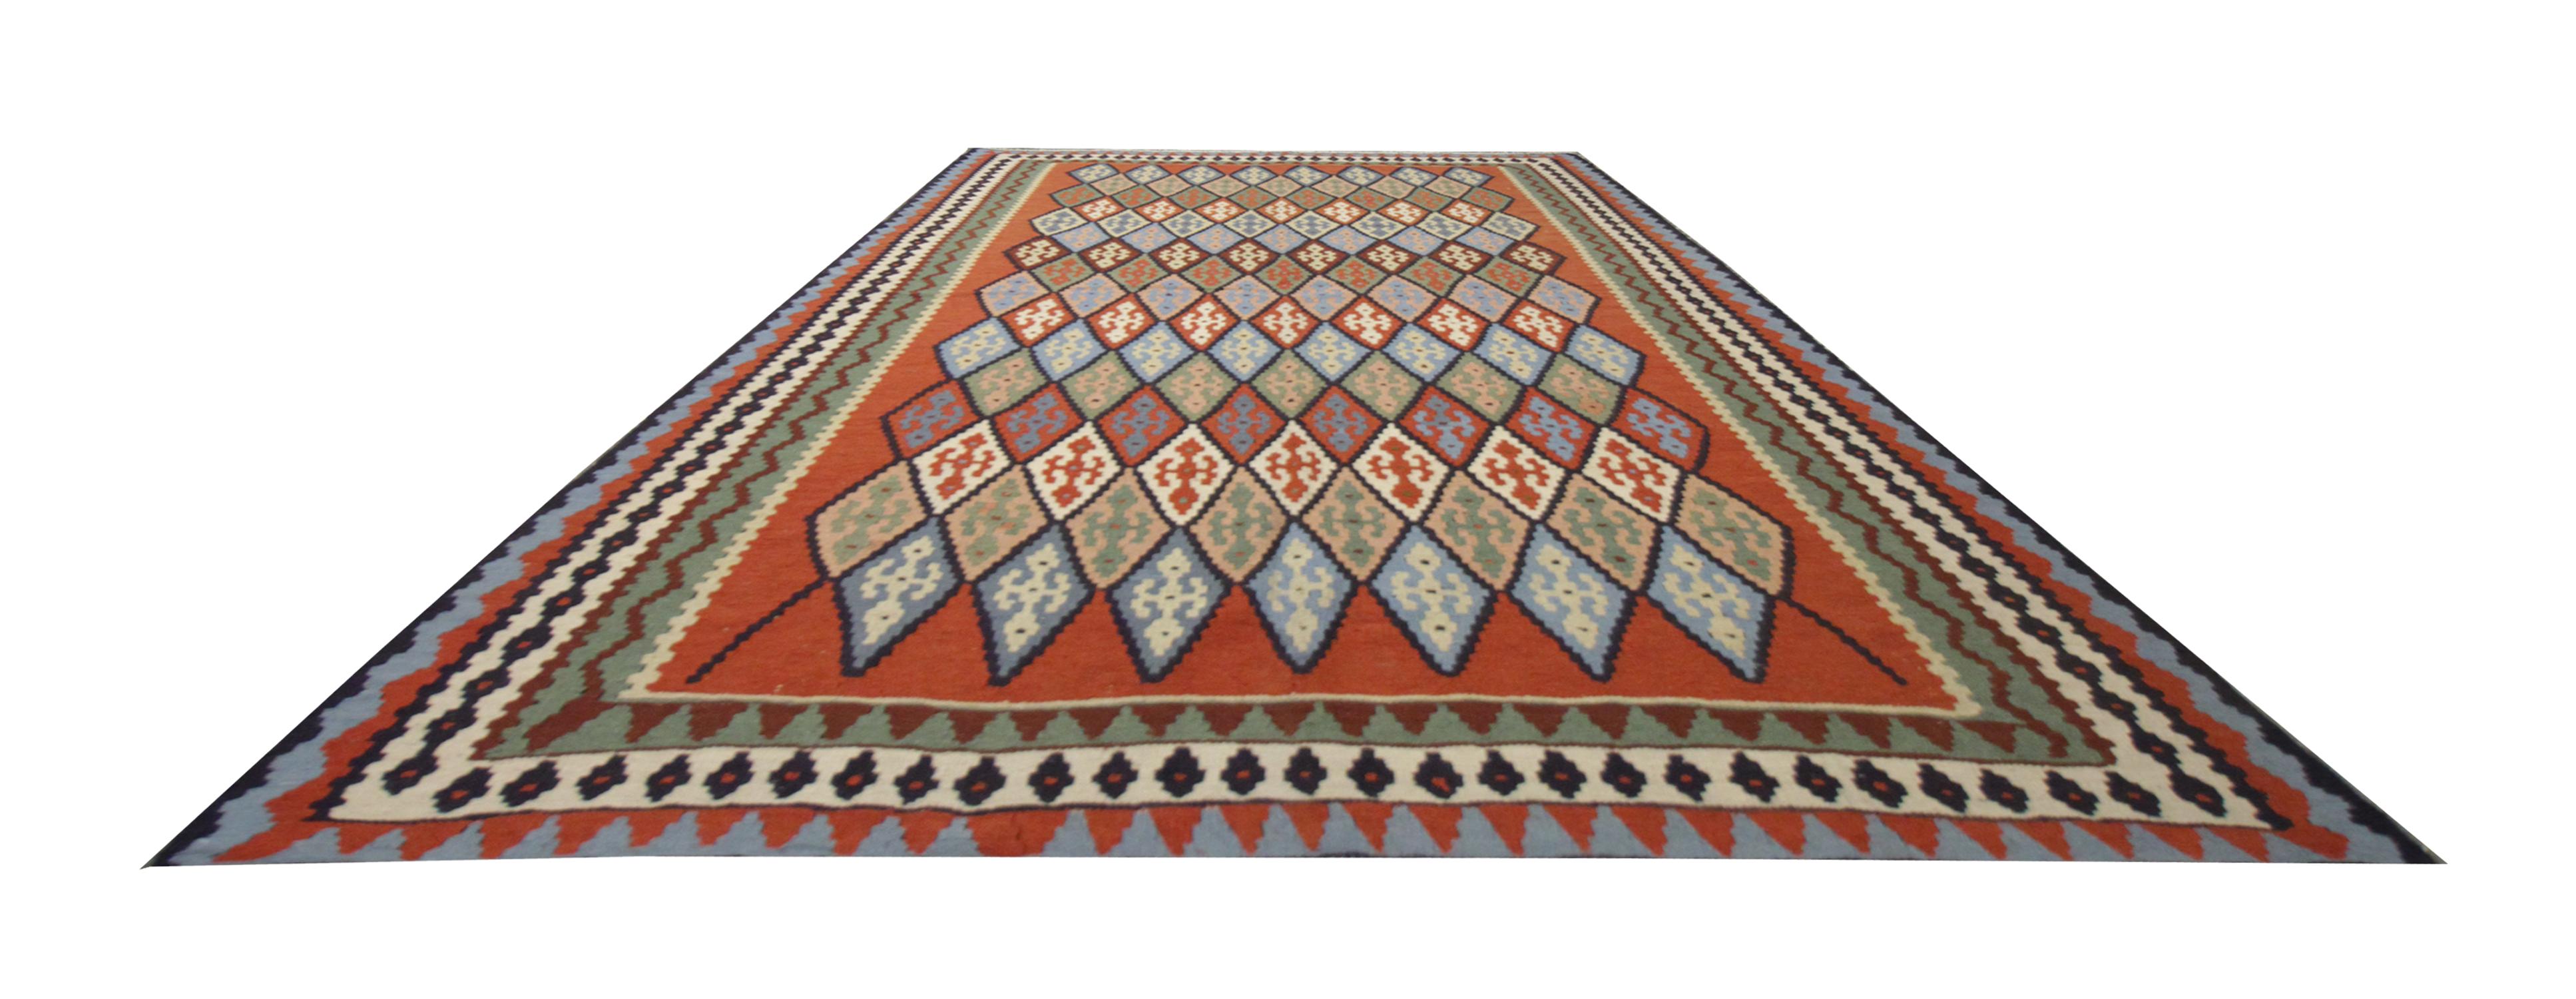 This elegant handwoven wool area rug was constructed in the late 20th century around 1980 in Turkey. The design features cream, brown, blue, orange and rust colours that make up the fantastic elegant pattern tribal design. Both the colour and